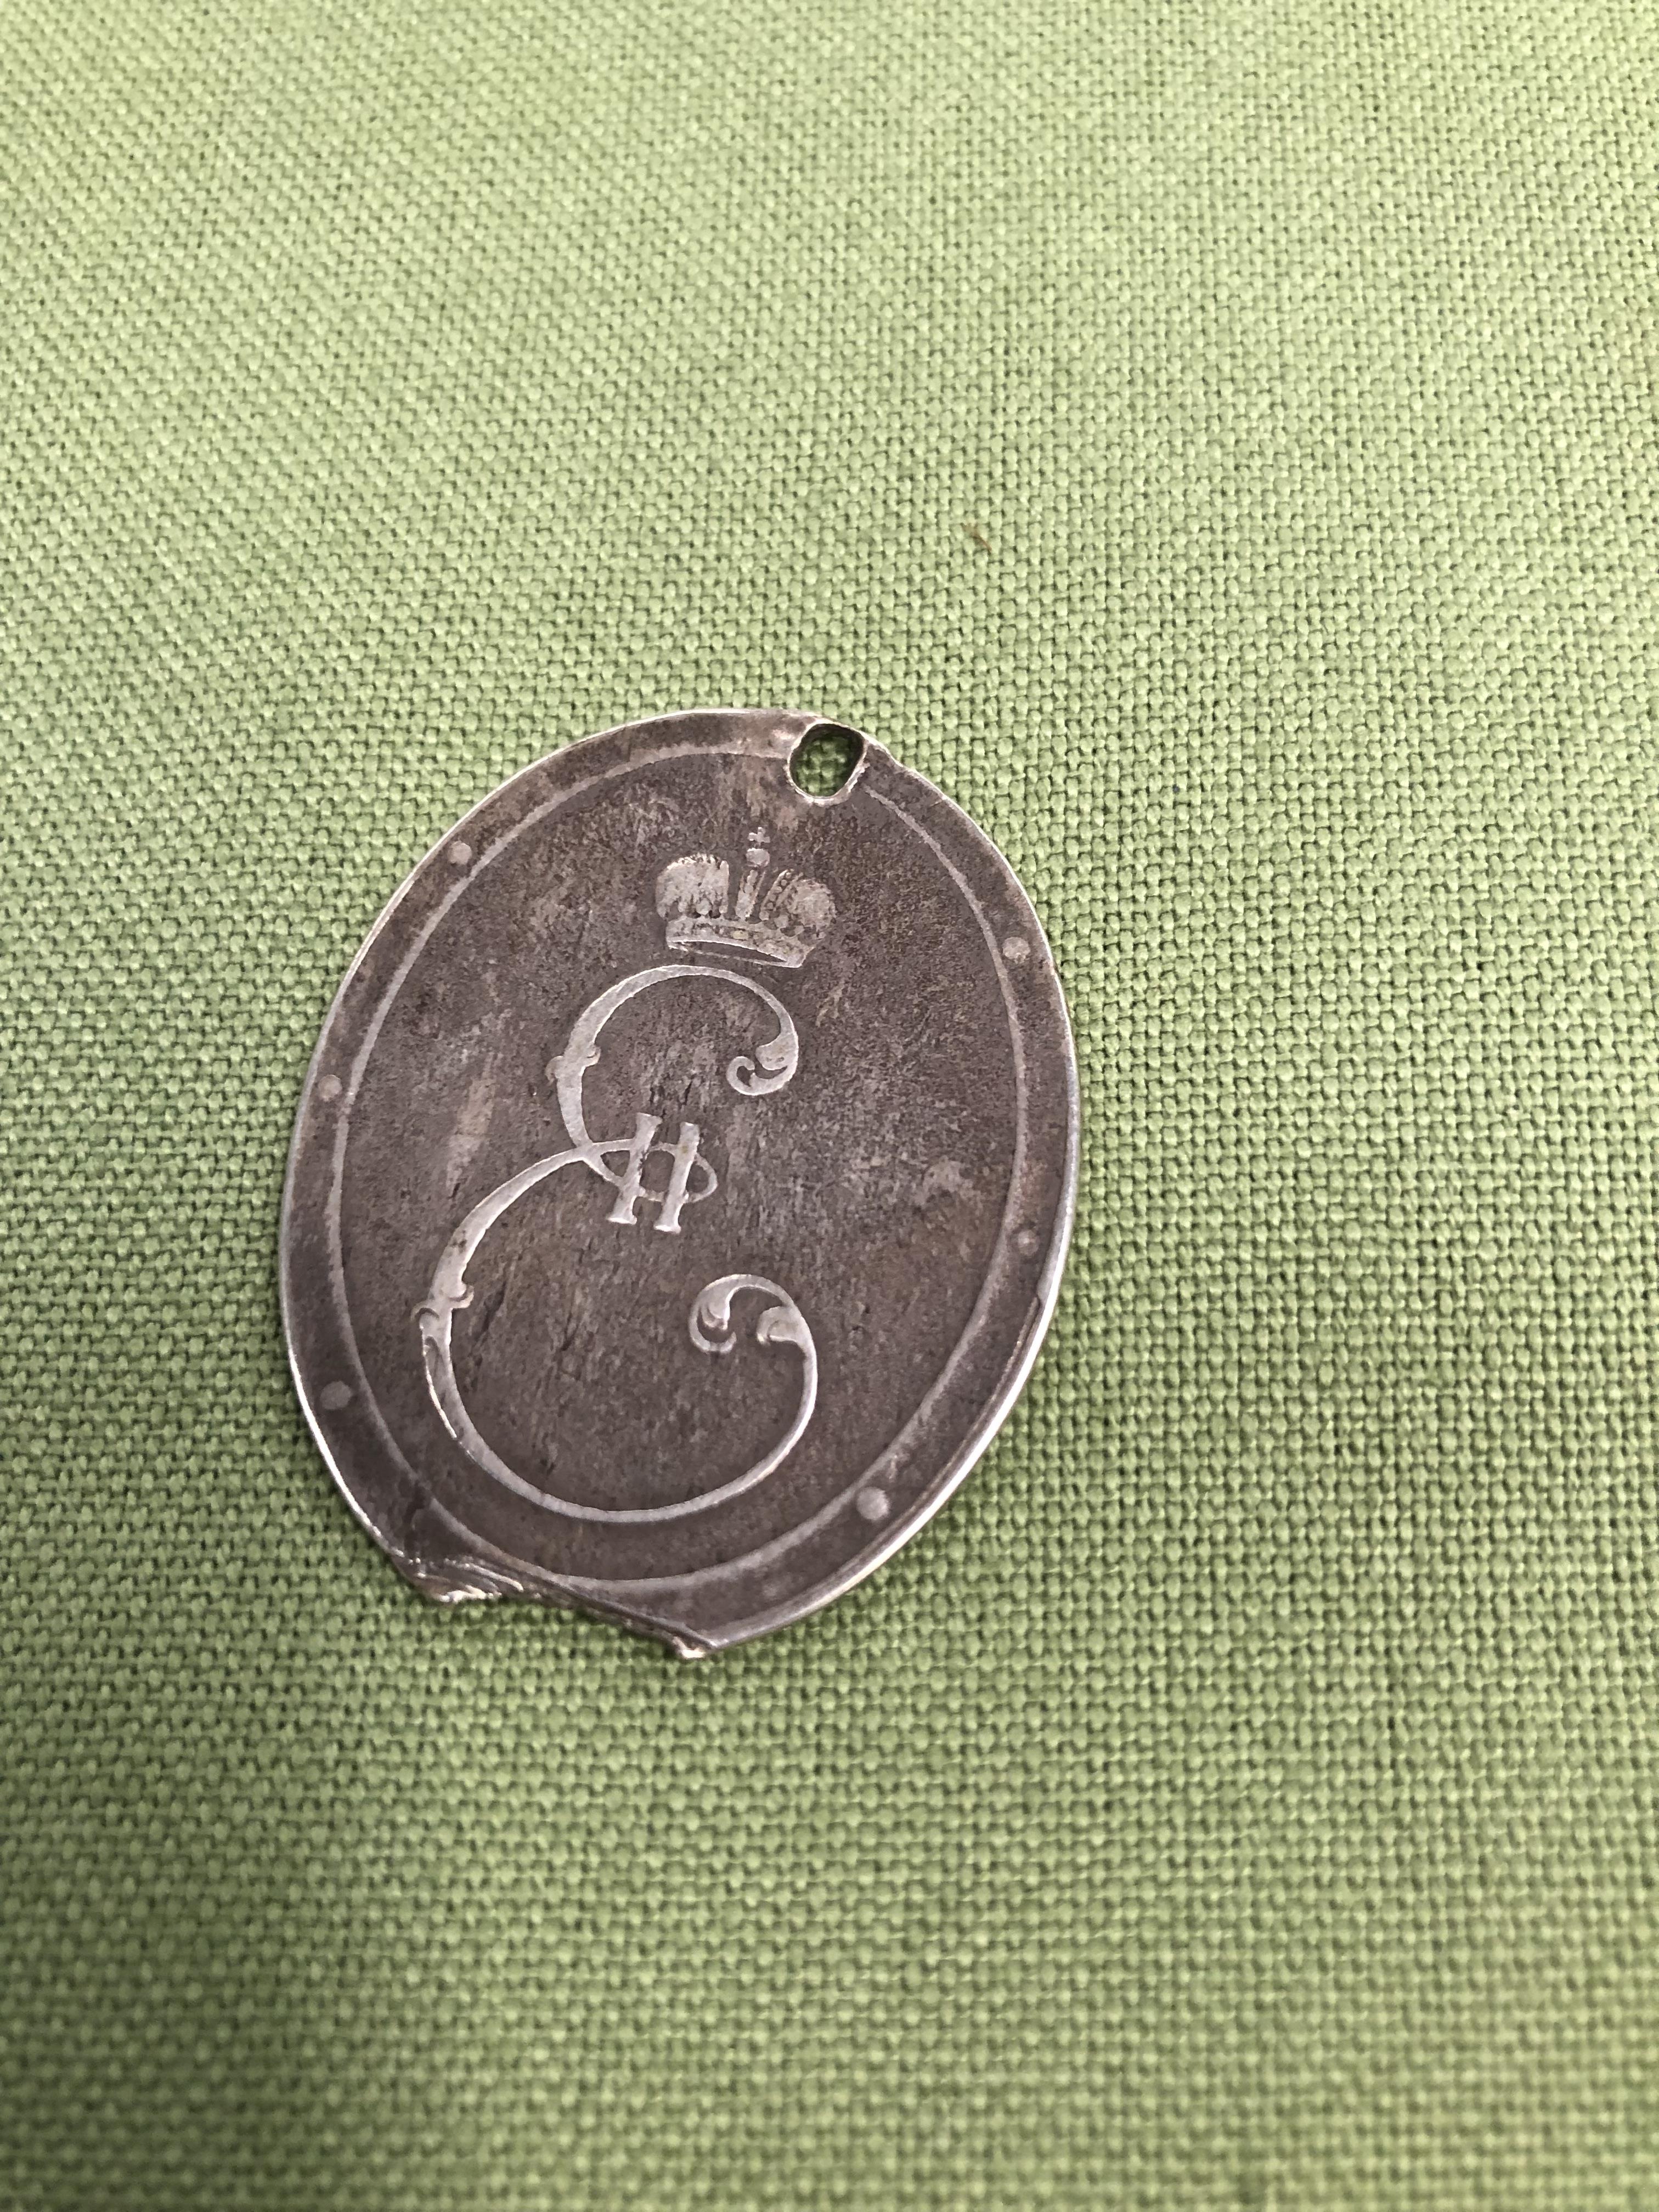 A RUSSIAN TOKEN STAMPED 1791. - Image 2 of 2